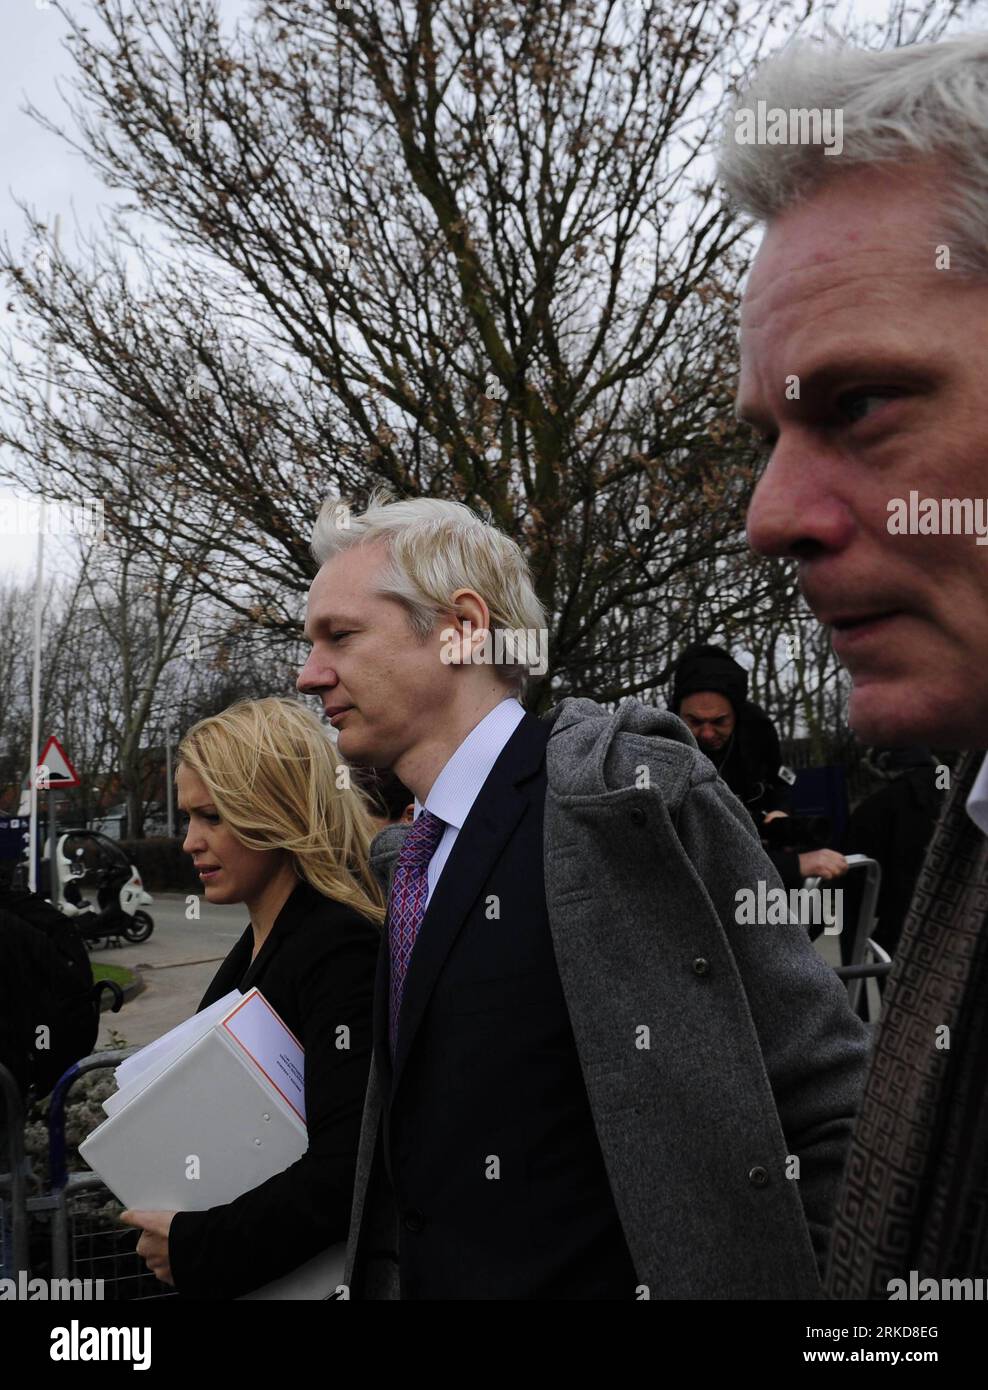 Bildnummer: 54885775  Datum: 07.02.2011  Copyright: imago/Xinhua (110207) -- LONDON, Feb. 7, 2011 (Xinhua) -- Wikileaks founder Julian Assange (C) arrives at Belmarsh Magistrates Court in London to attend a two-day final hearing examining his extradition to Sweden, Feb. 7, 2011. (Xinhua/Zeng Yi) (djj) BRITAIN-WIKILEAKS-ASSANGE-HEARING PUBLICATIONxNOTxINxCHN People Politik kbdig xdp 2011 hoch premiumd     Bildnummer 54885775 Date 07 02 2011 Copyright Imago XINHUA  London Feb 7 2011 XINHUA wikileaks Founder Julian Assange C arrives AT Belmarsh Magistrates Court in London to attend a Two Day Fina Stock Photo